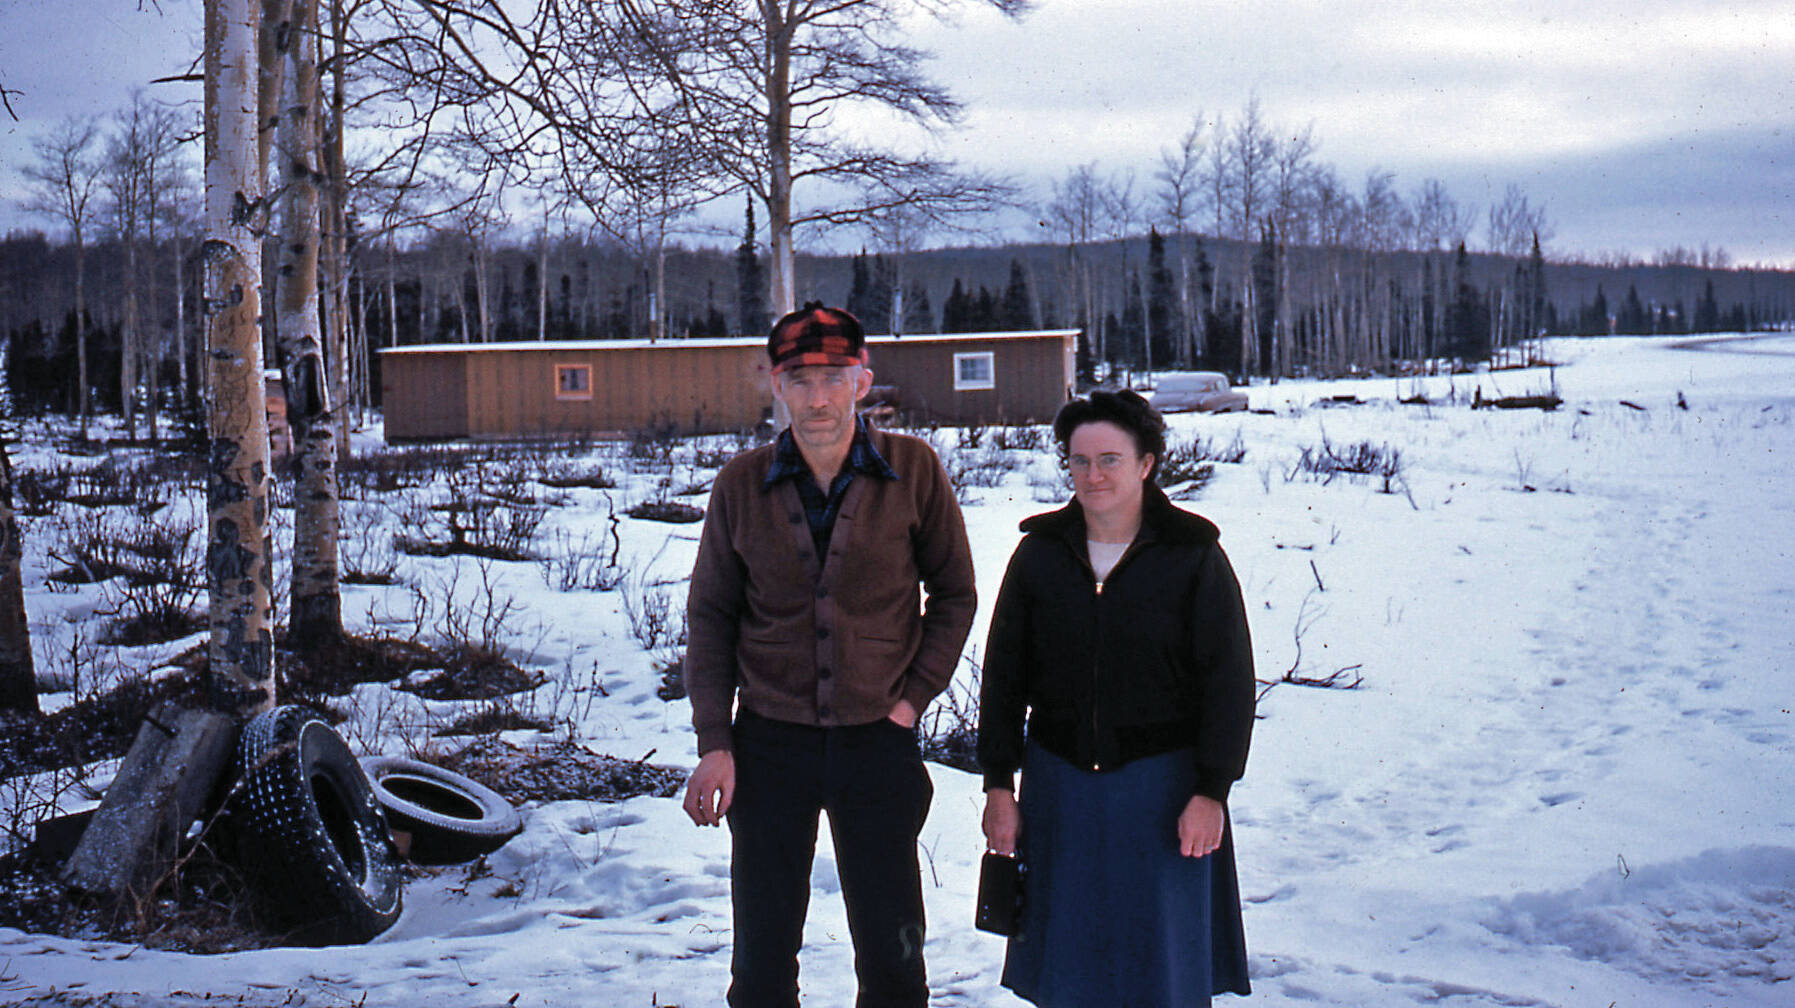 Ray Sandstrom photo courtesy of the KPC historical photo archive
Verona (Keeler) Wilson and her husband, Don Wilson, pose in 1953 near their grocery (in background), the first in Soldotna.